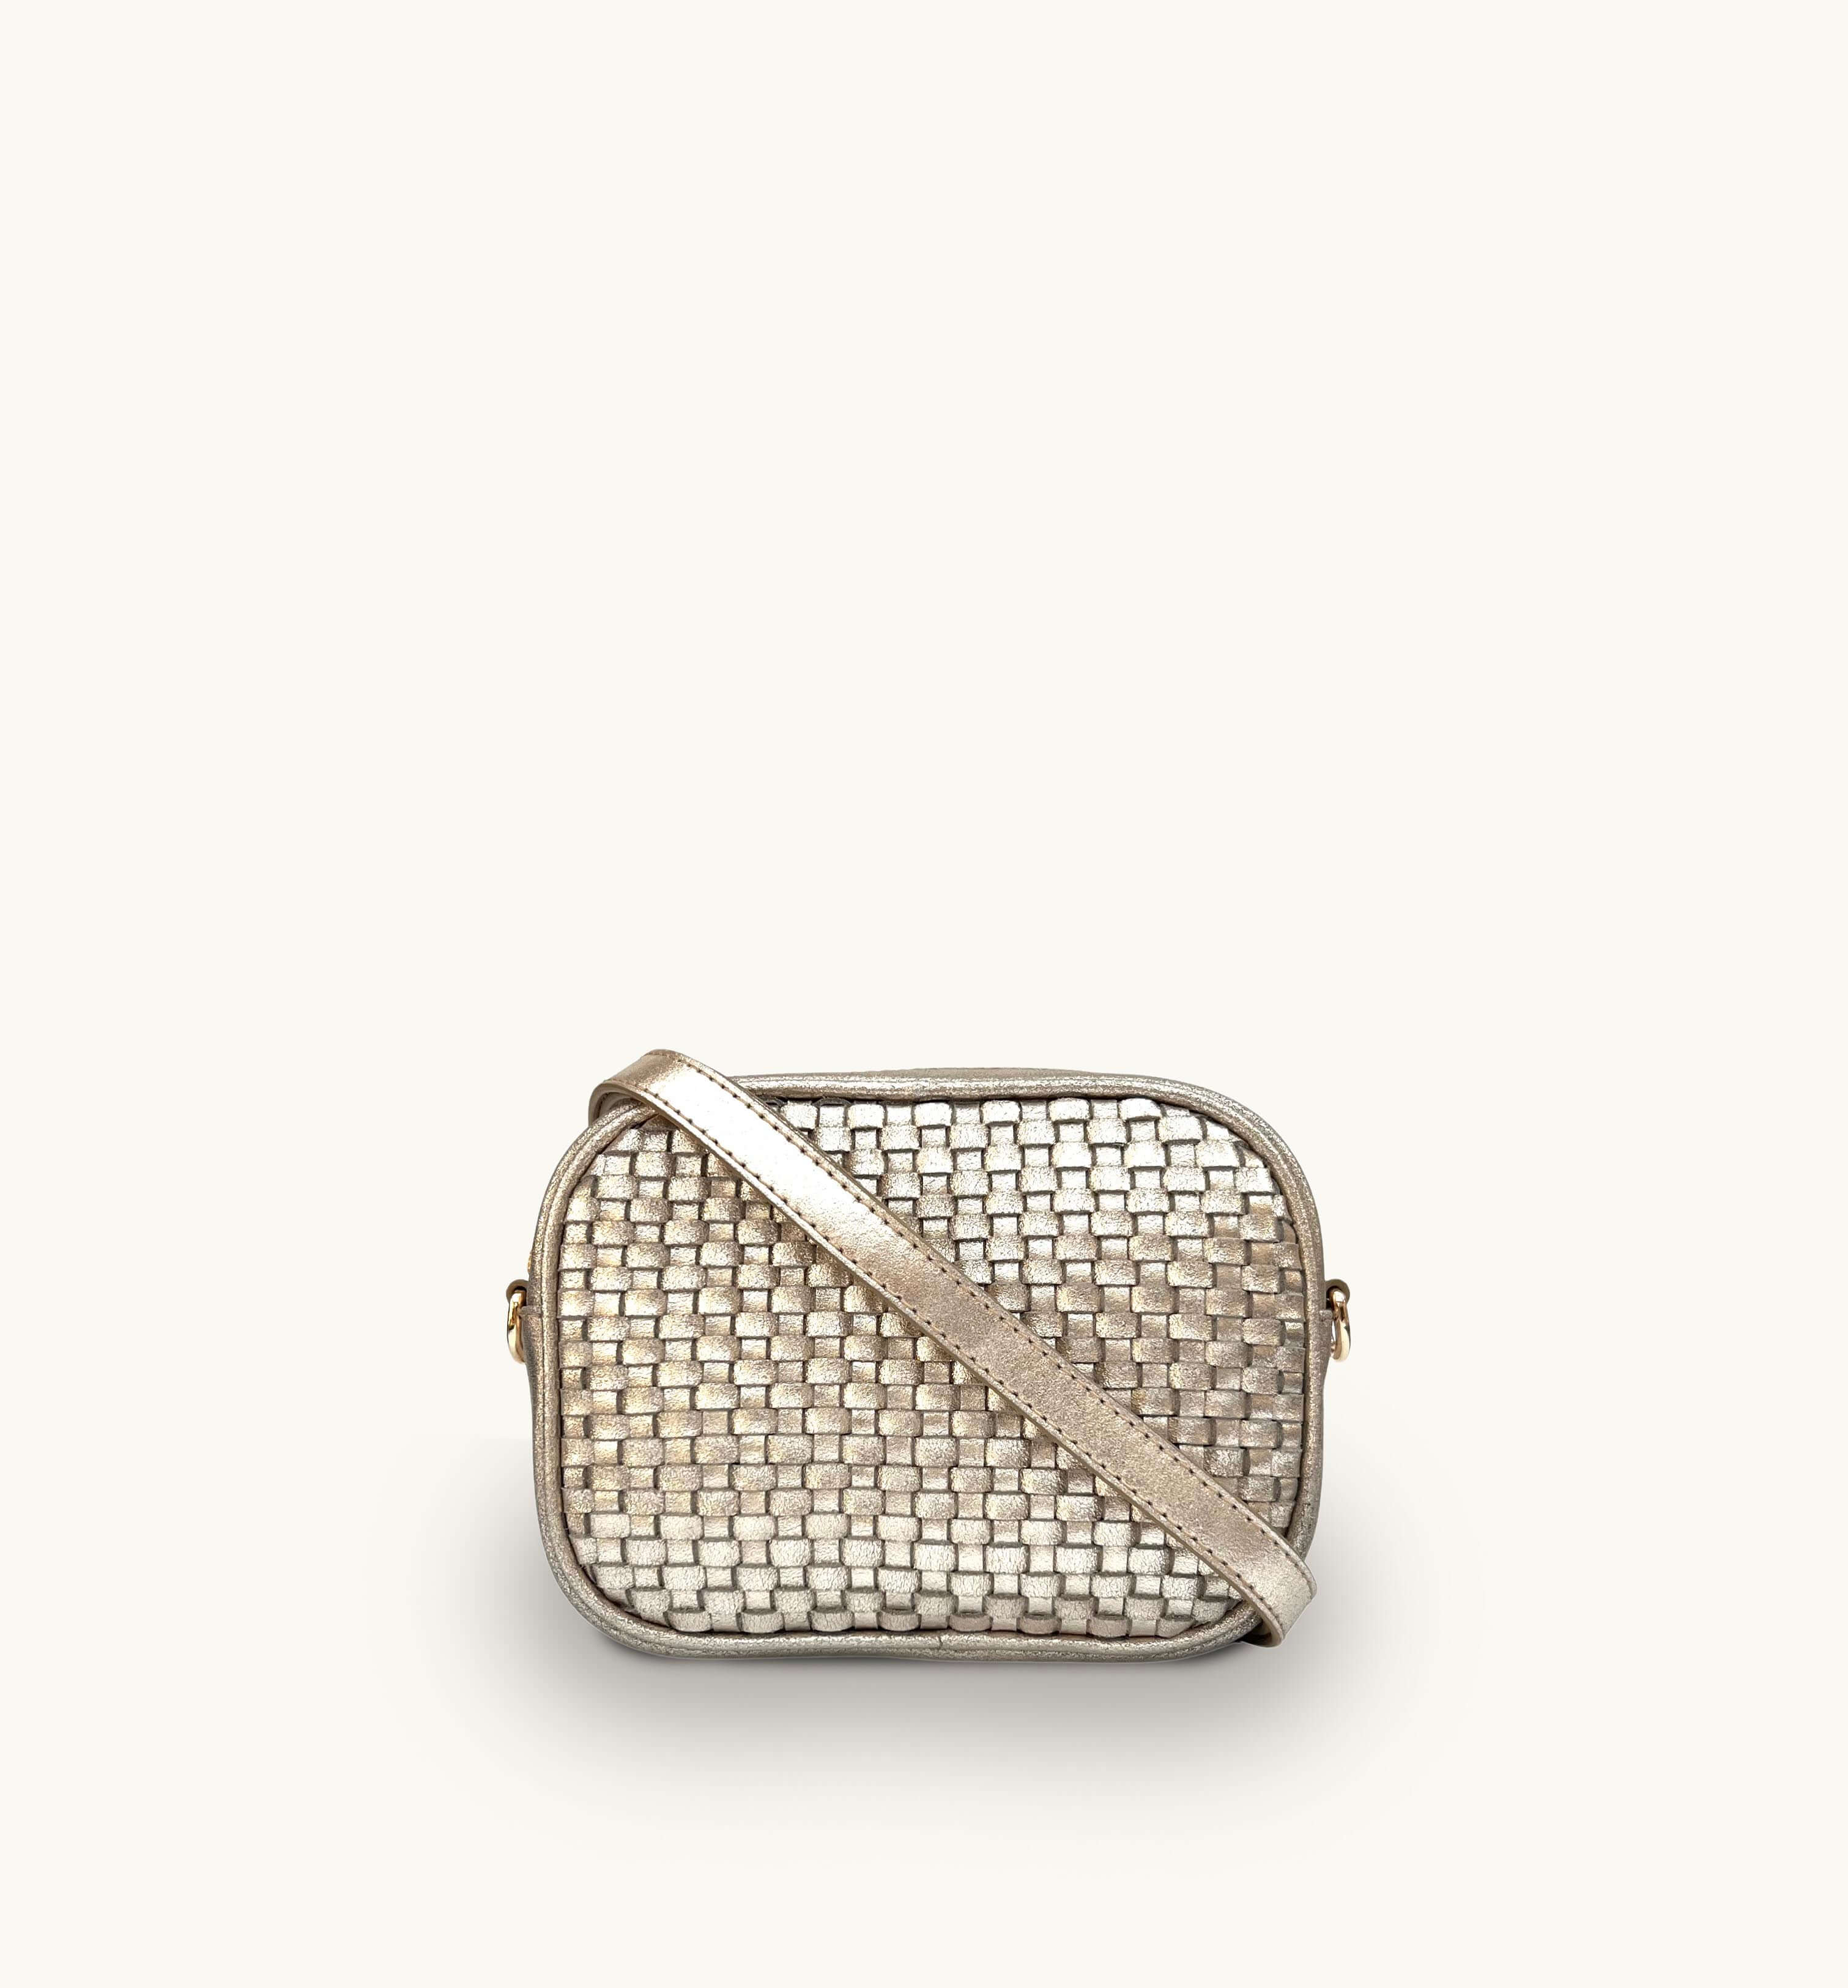 The Penelope Gold Woven Leather Camera Bag